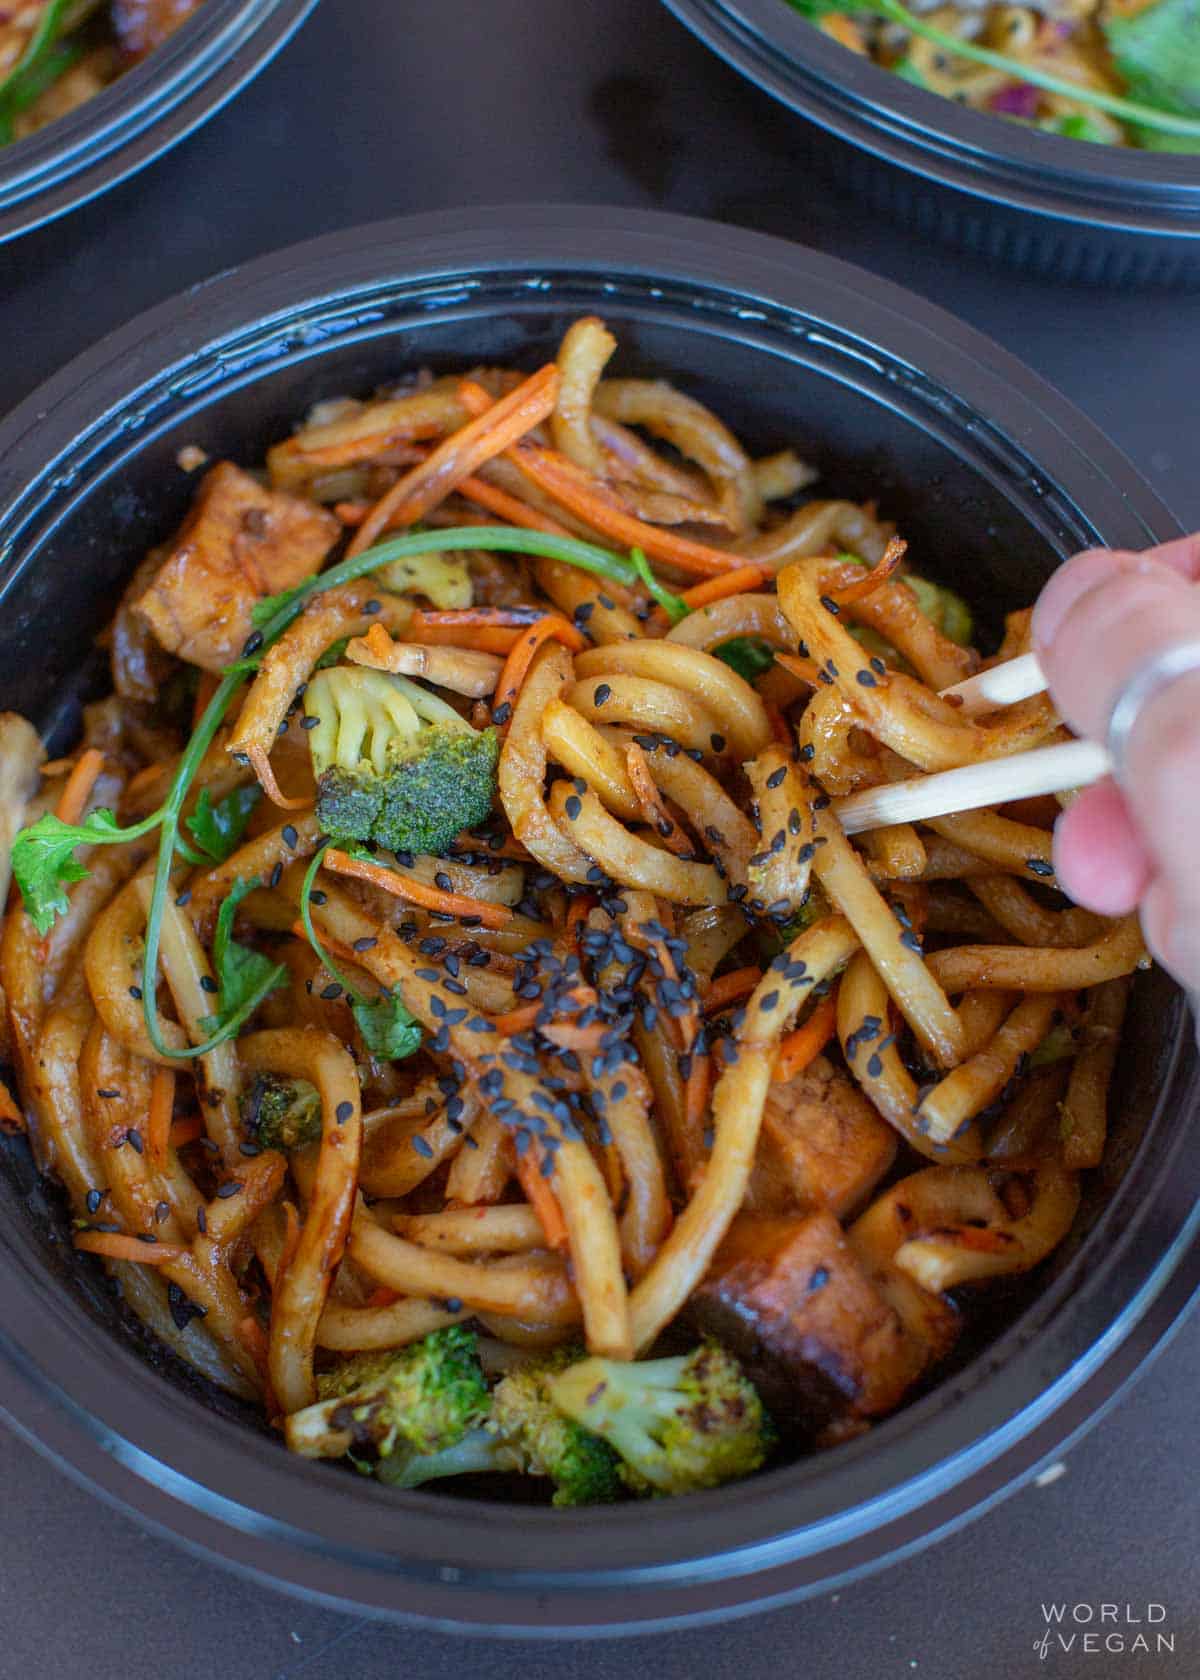 Take out container of vegan Japanese pan noodles and company